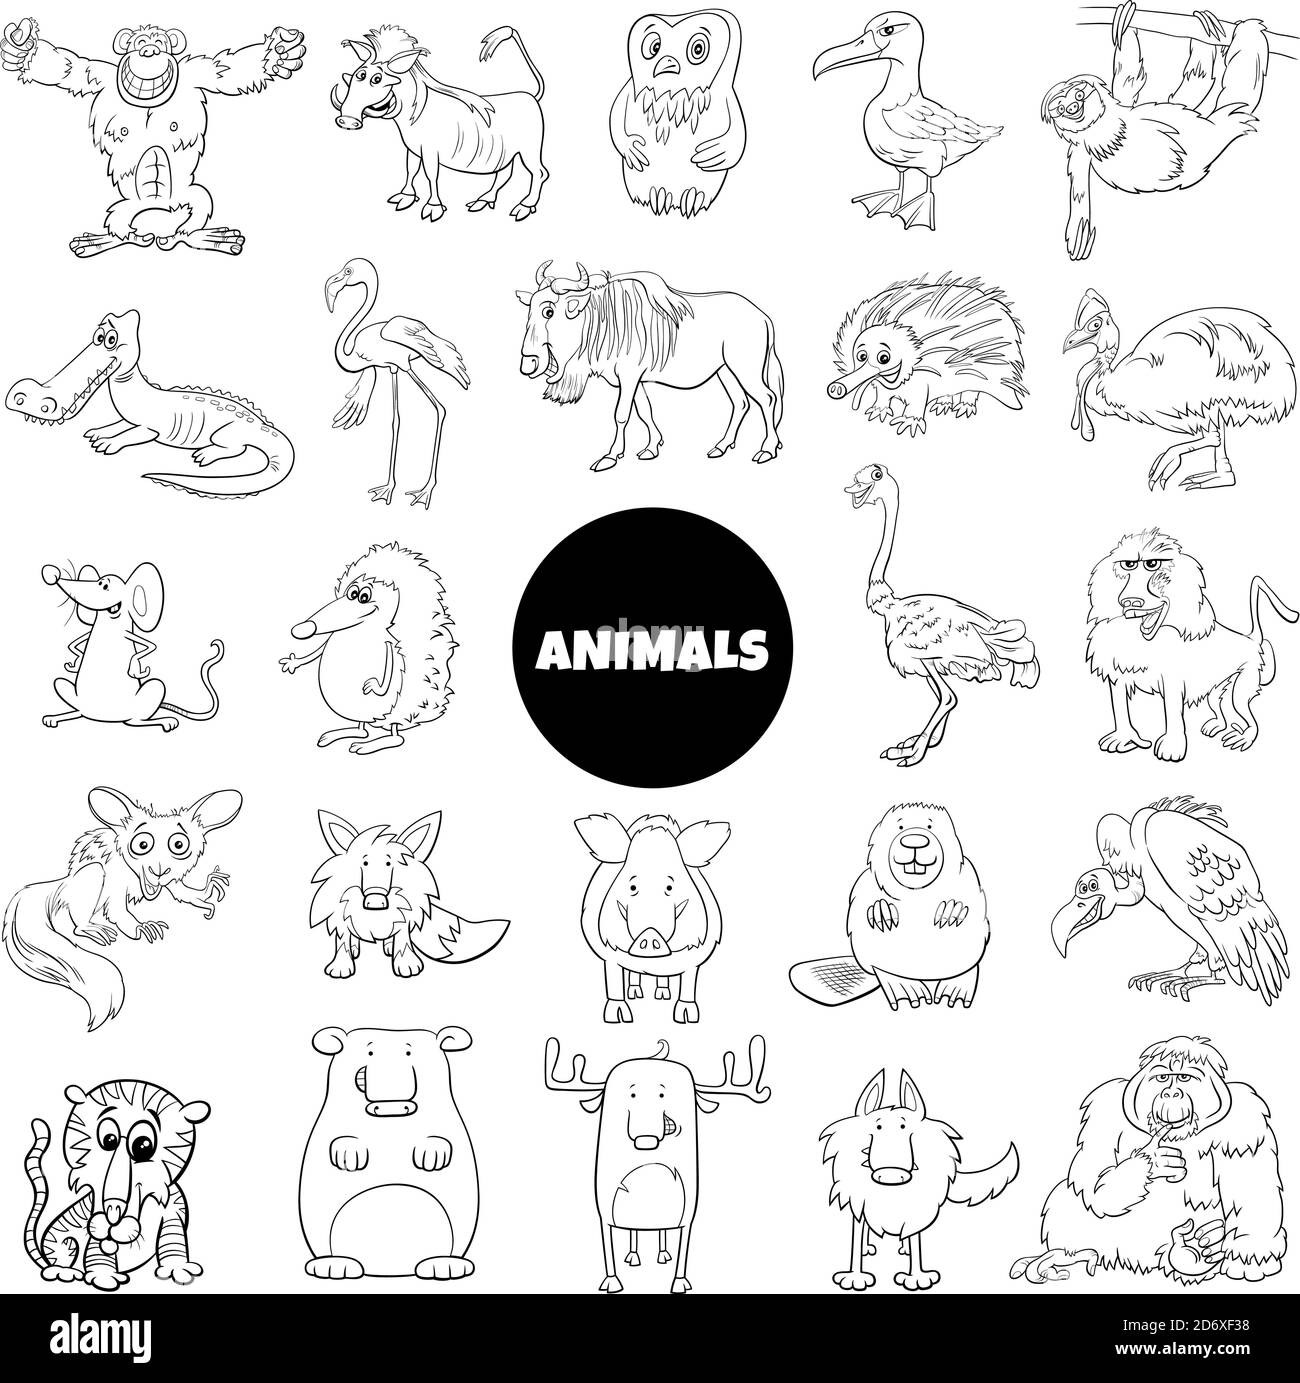 Black and White Cartoon Illustration of Funny Wild Animal Characters Big Set Stock Vector